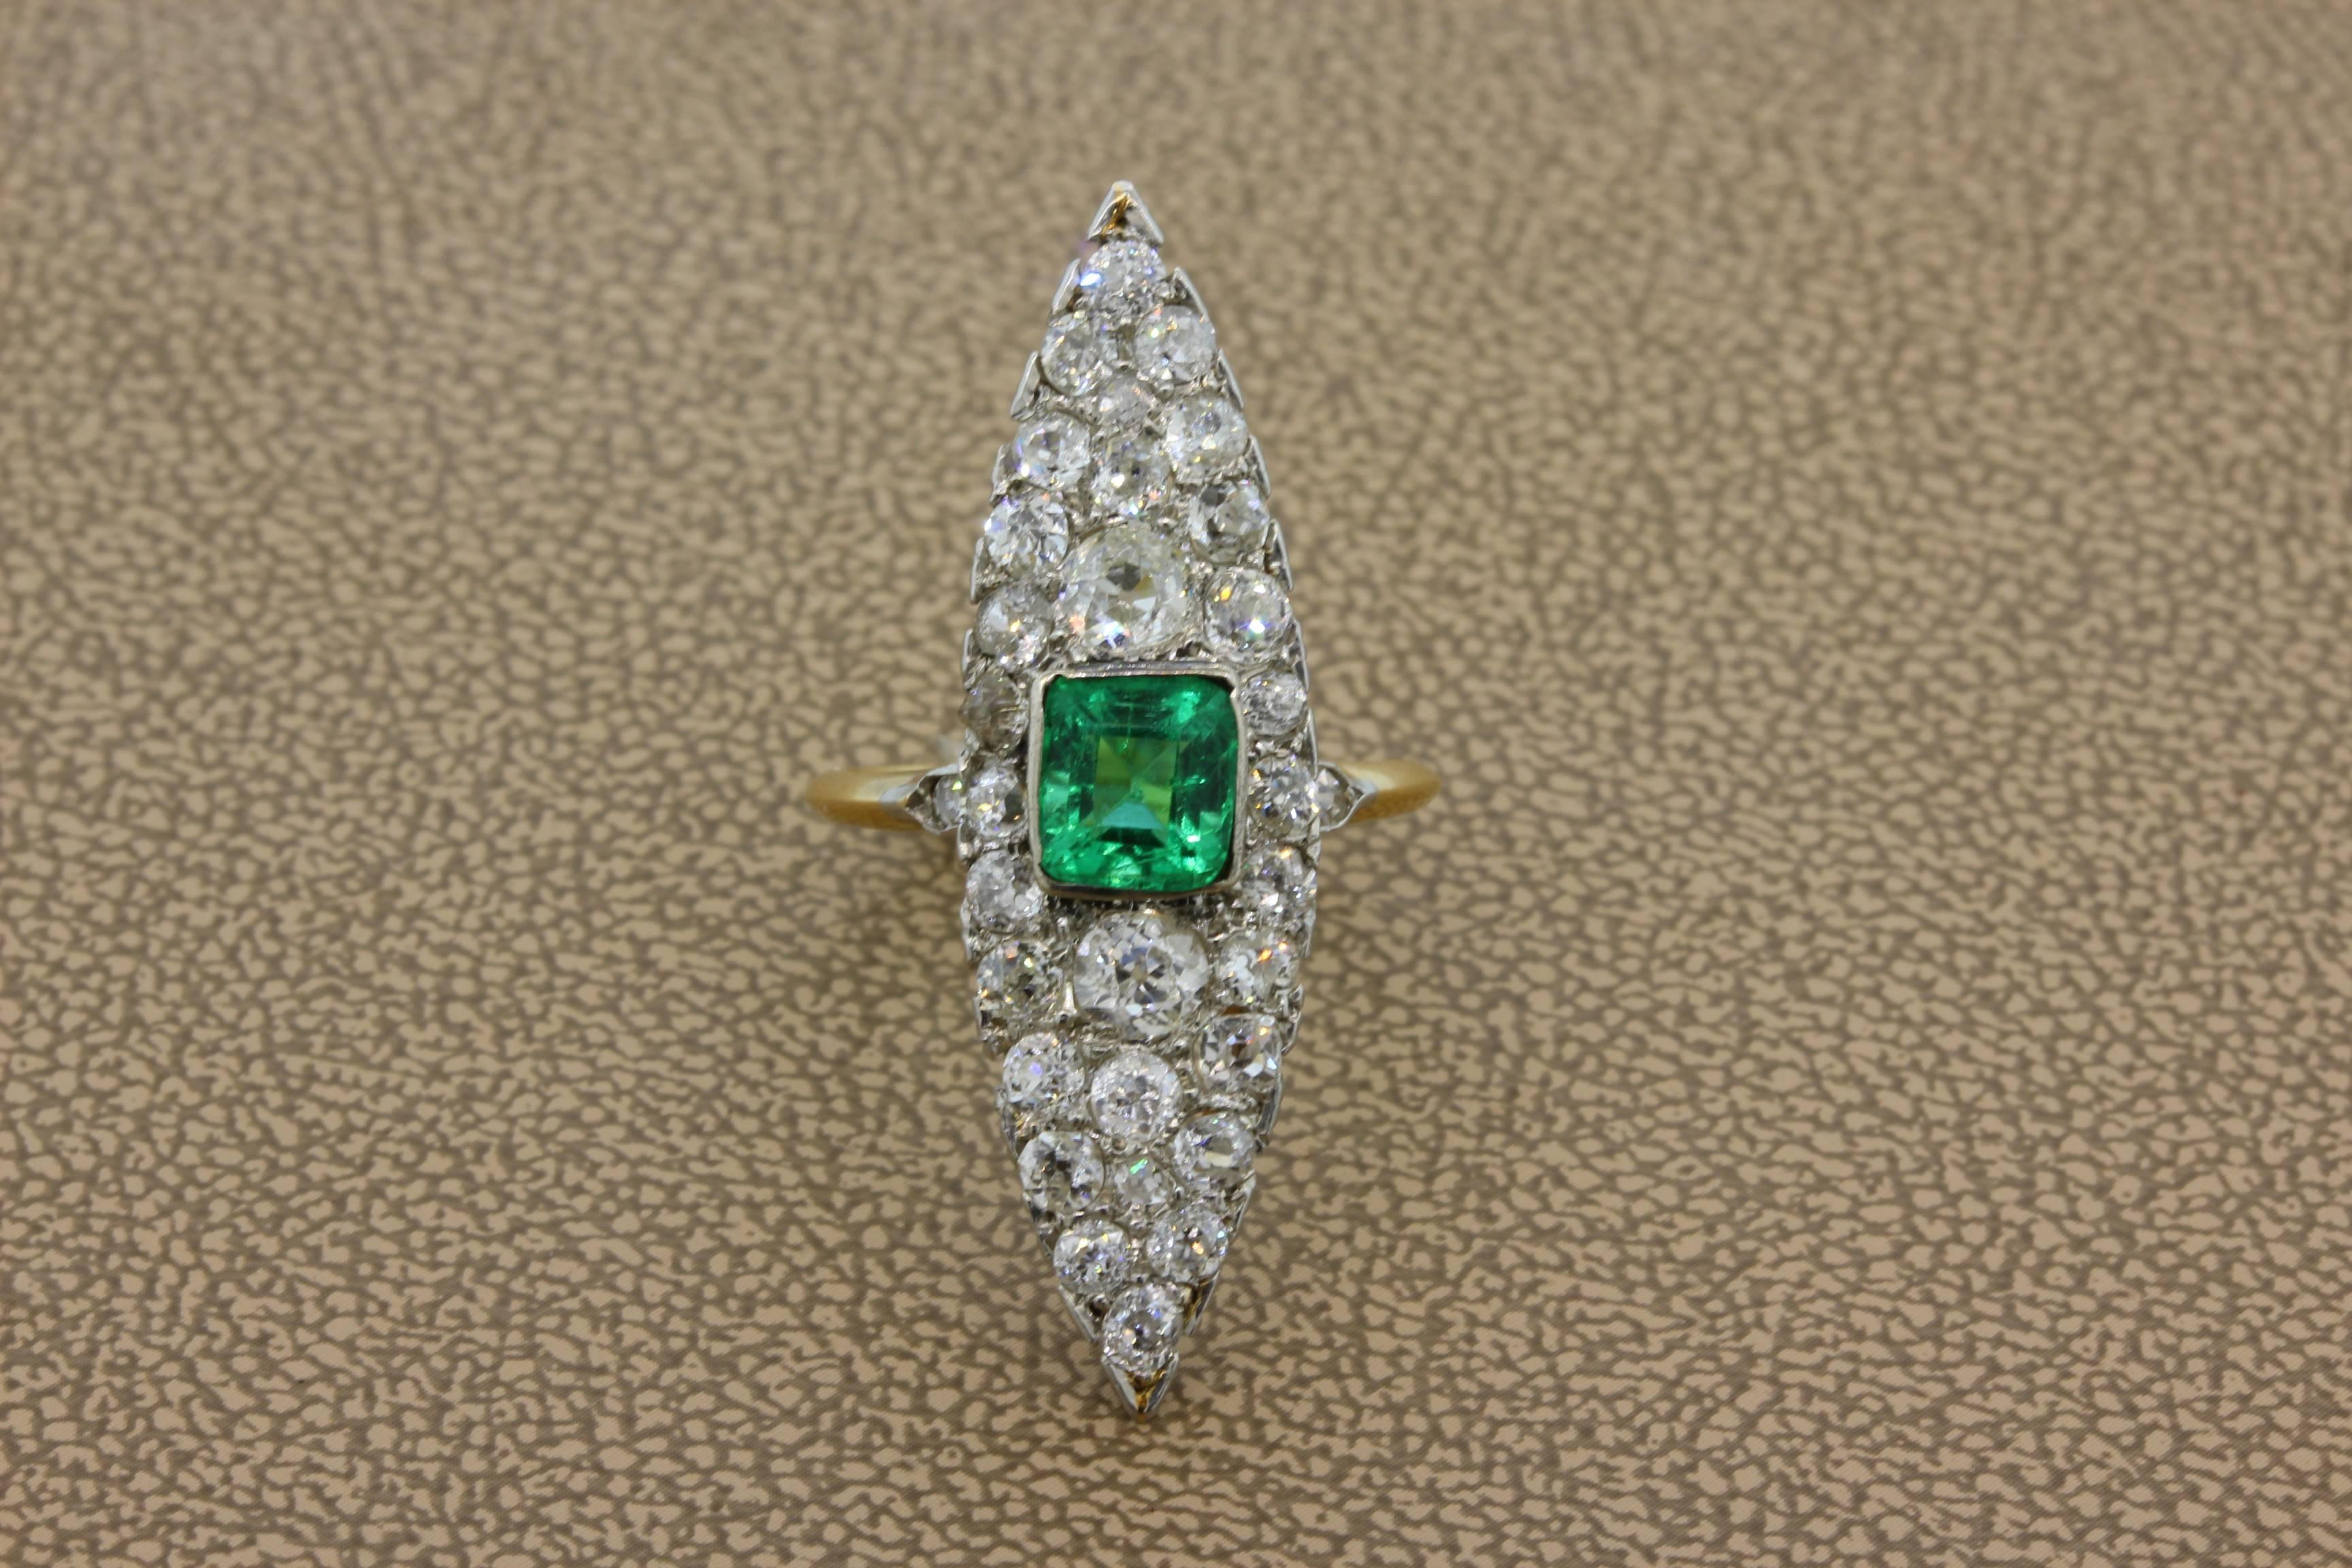 A classic Navette ring from the early 1900’s featuring a 1 carat emerald cut emerald. There are 1.94 carats of old-cut diamond accents around the luscious emerald, set in 18K yellow and white gold. 

Navette Length: 1.48 inches 

Size: 6
